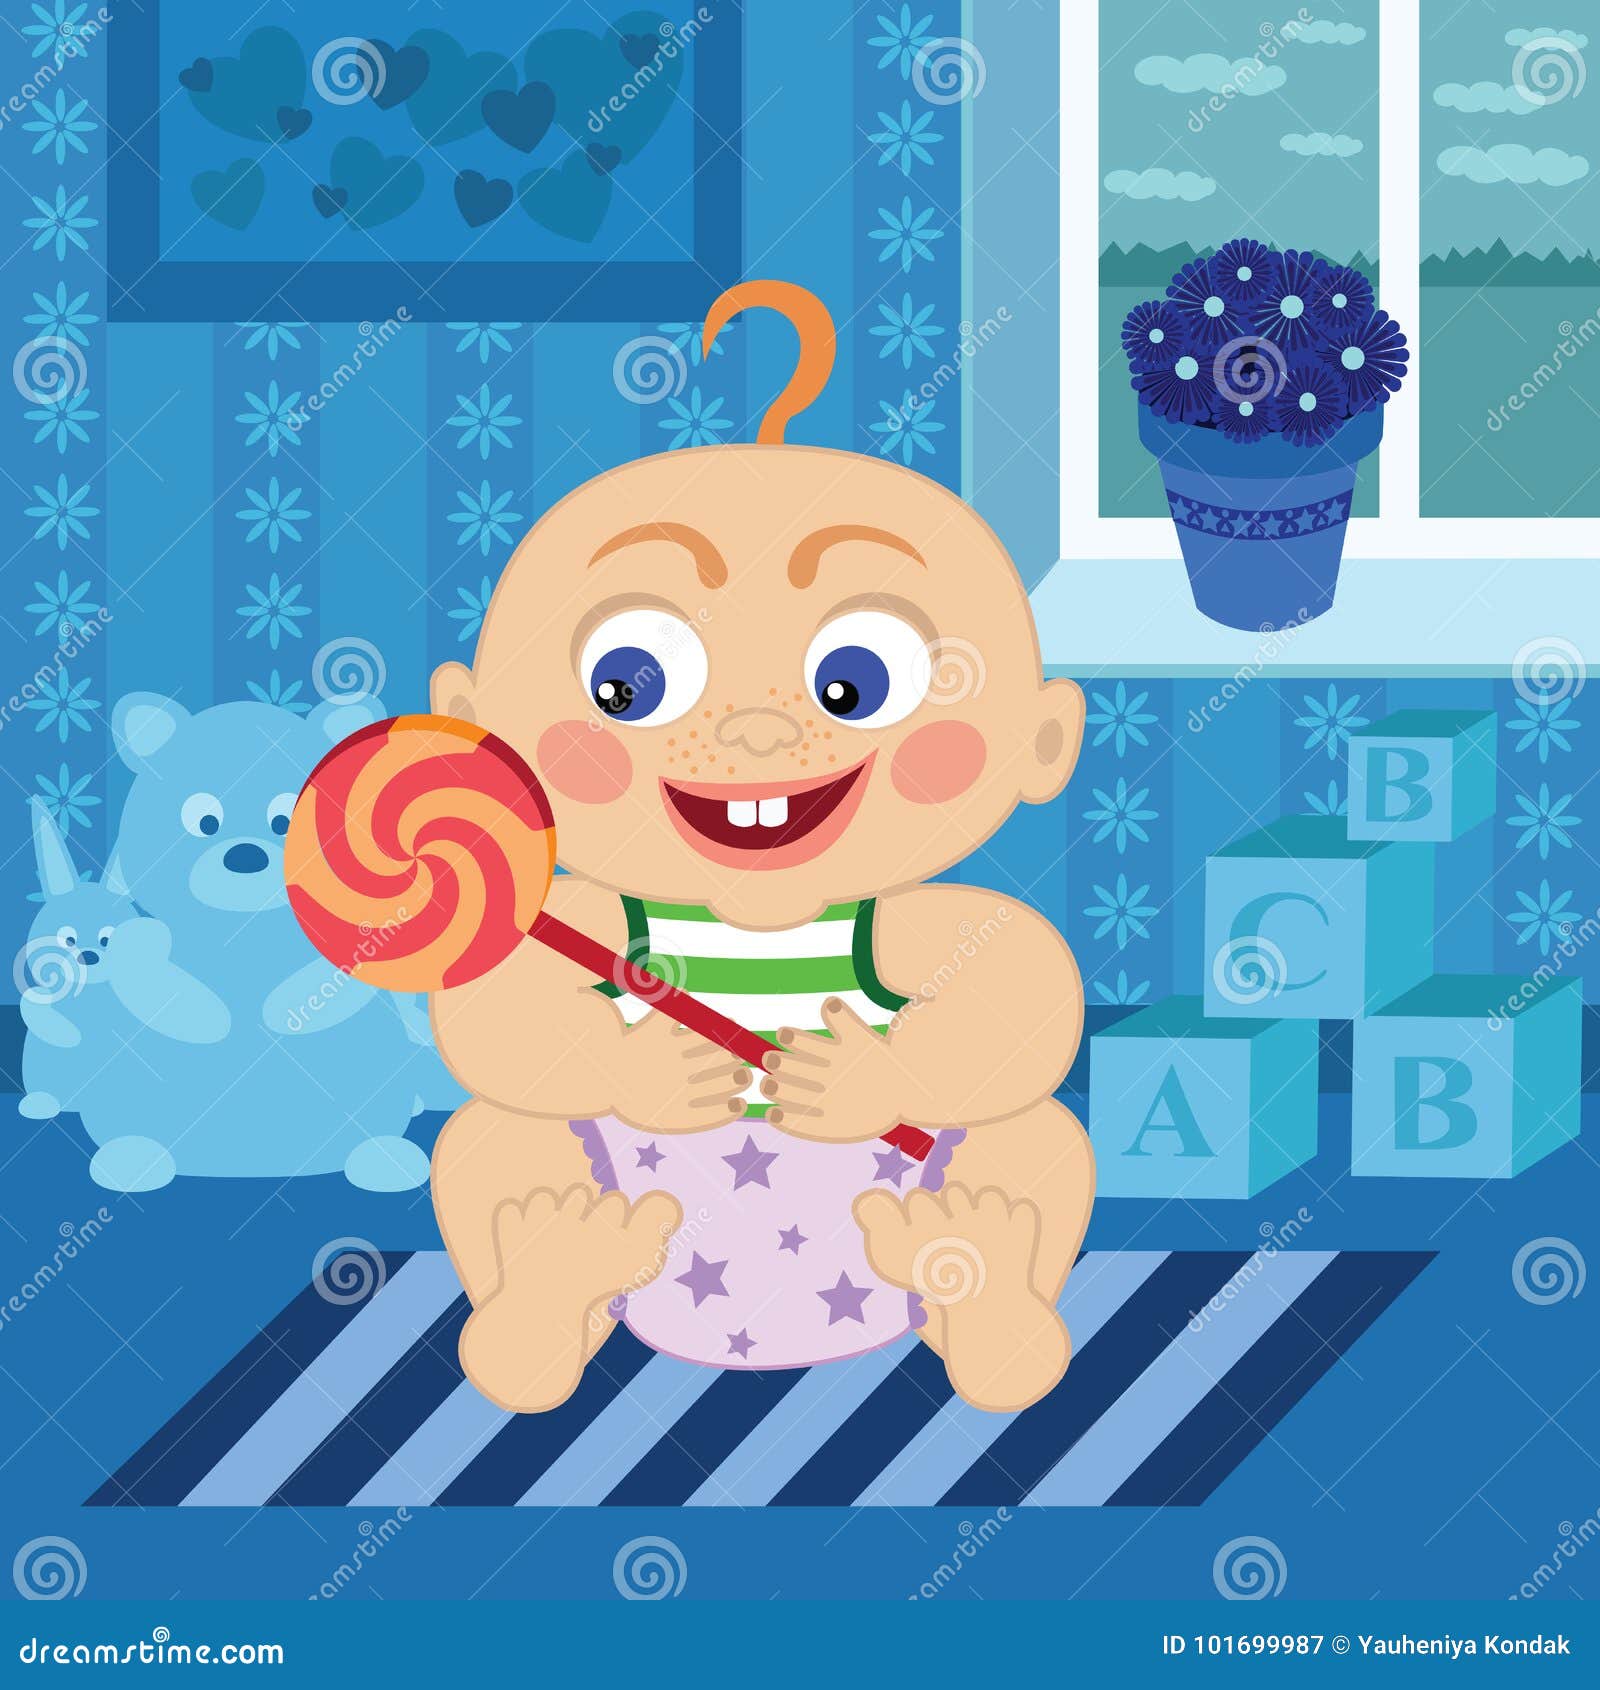 Cartoon Baby with Sugar Candy in the Room Stock Vector - Illustration of  teeth, cheerful: 101699987